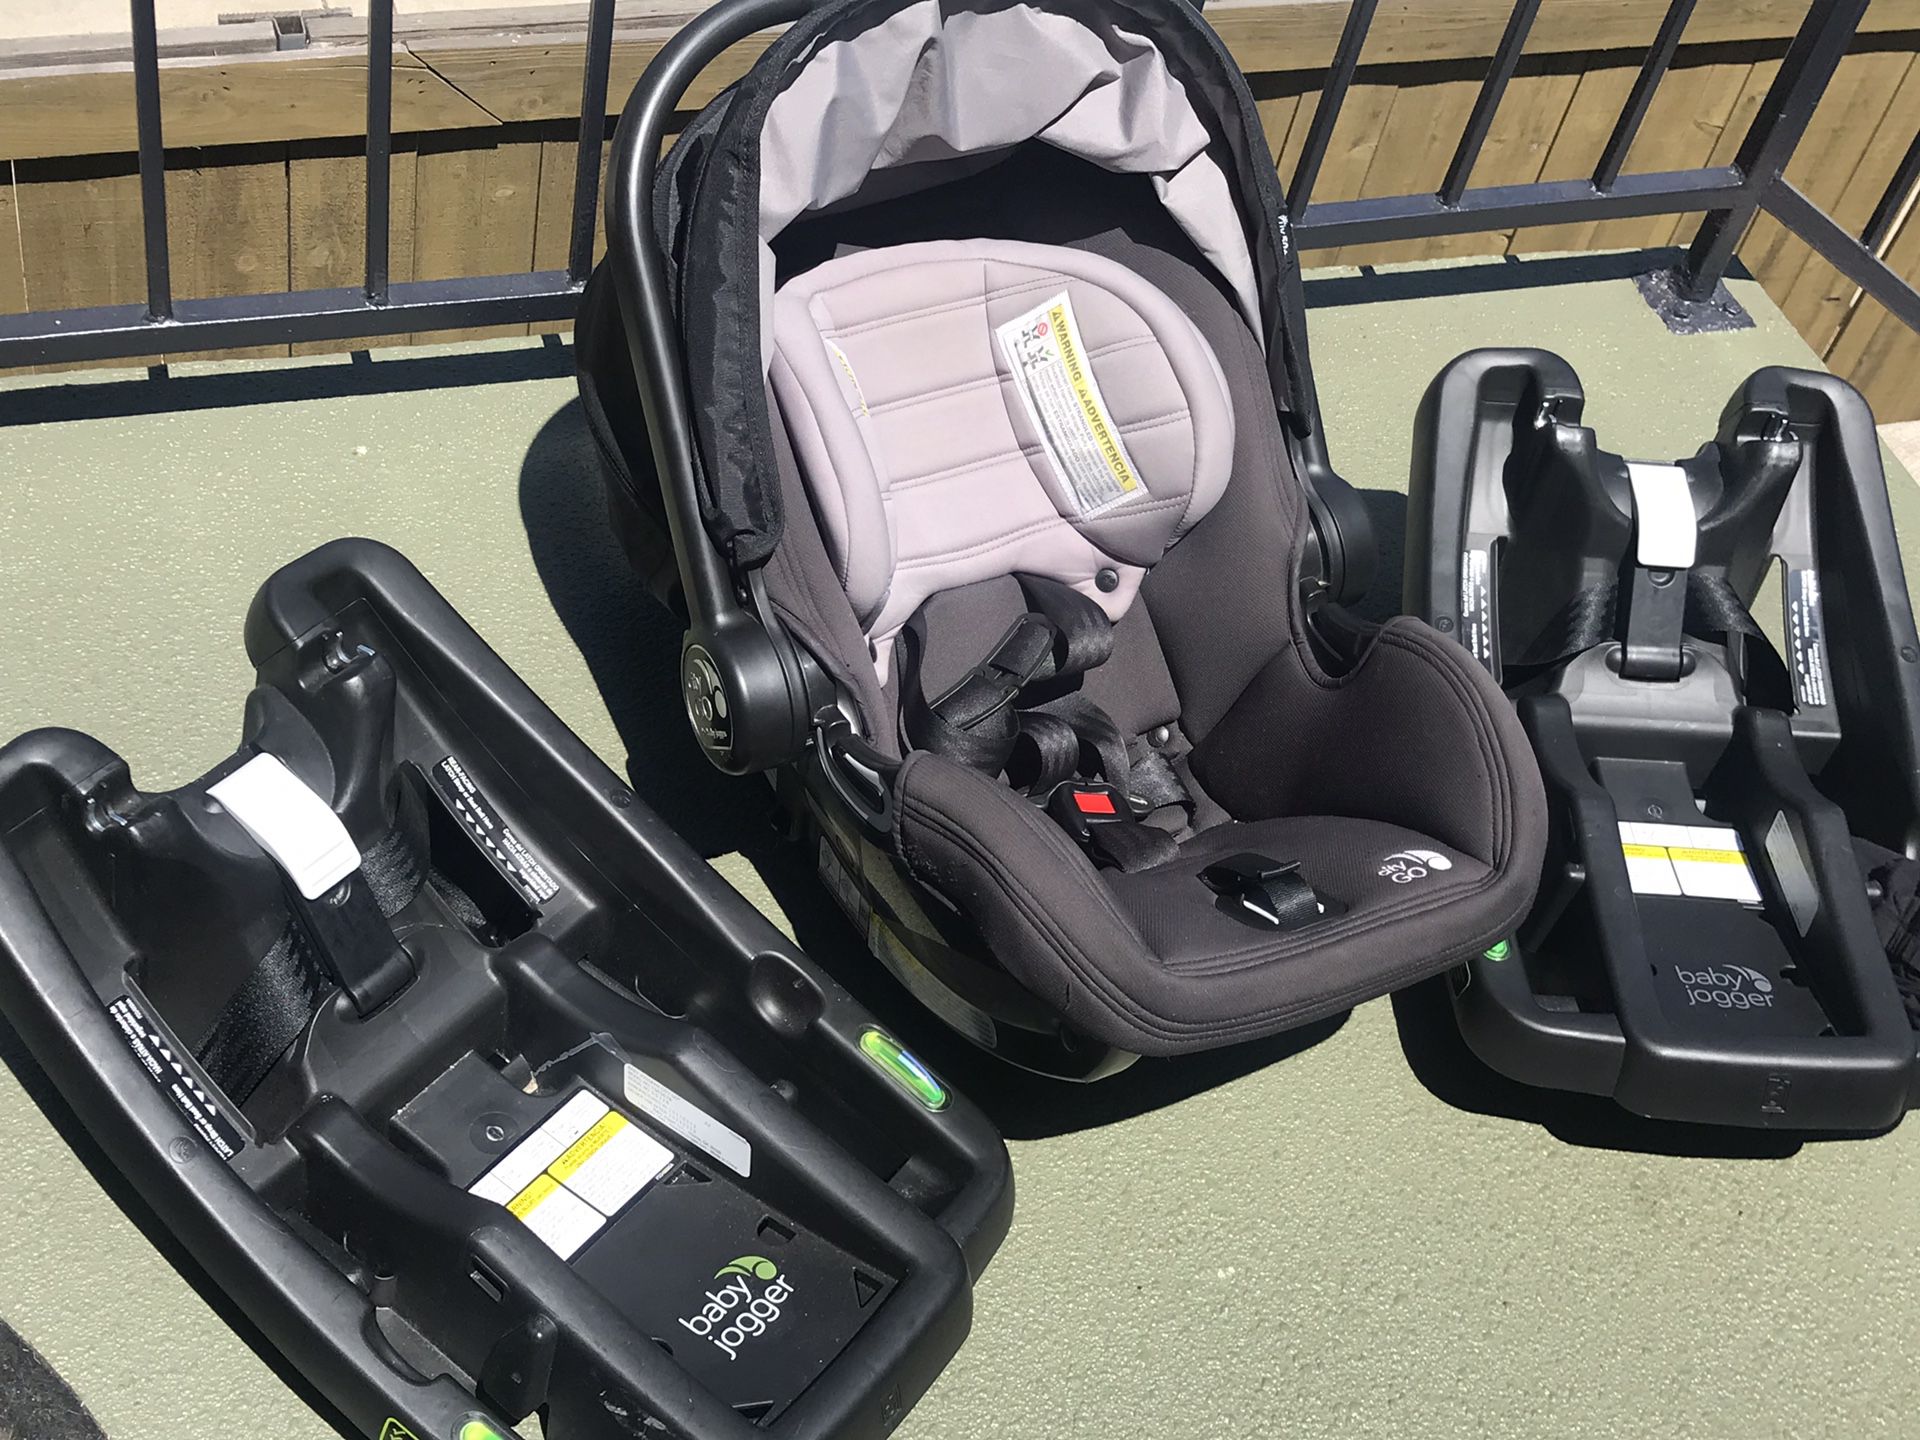 Baby Jogger car seat with two bases